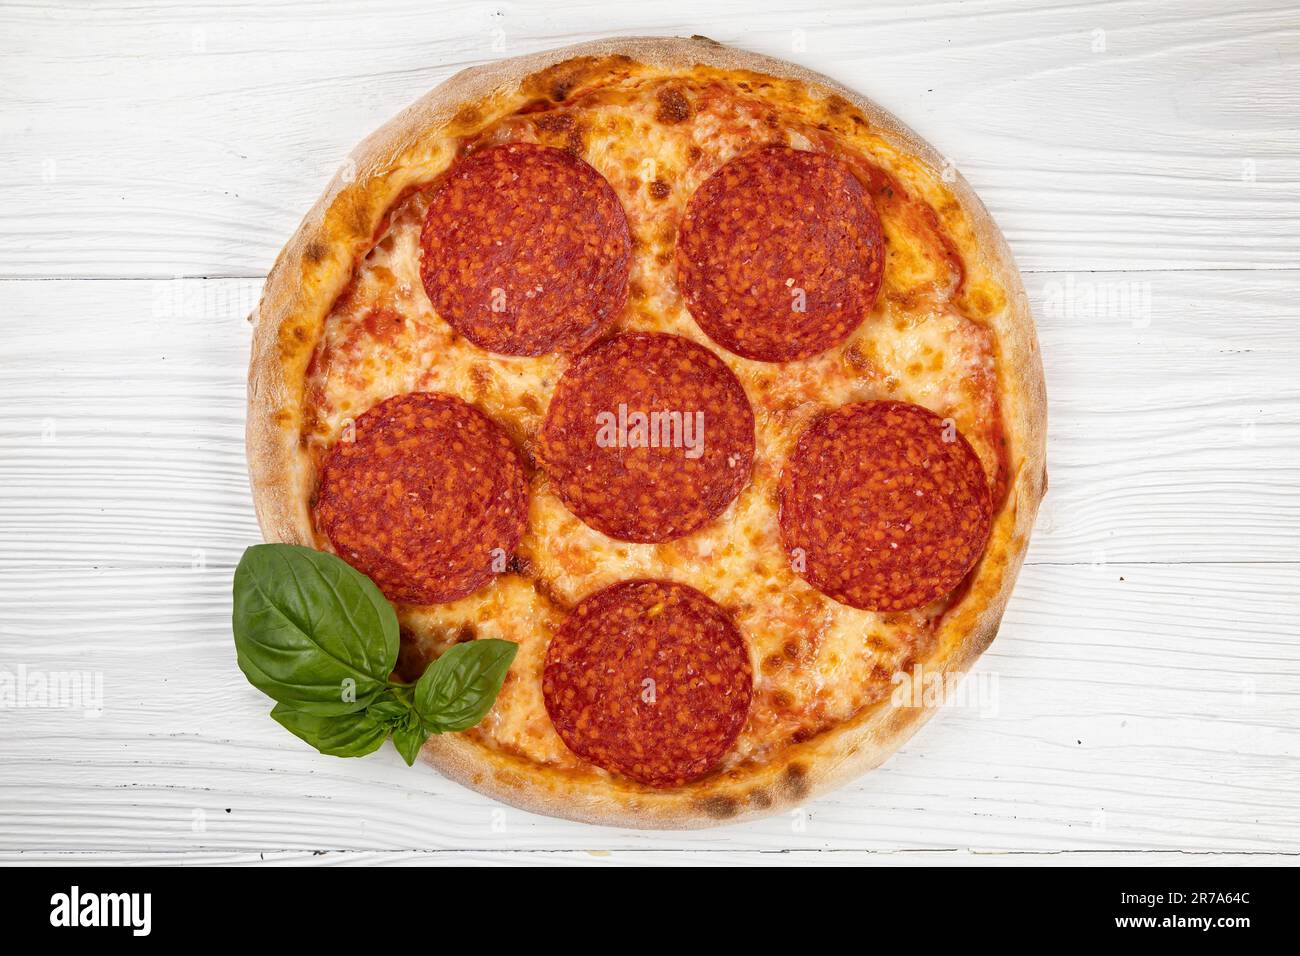 An image of a freshly made pepperoni pizza served with a basil plant in the background on a wooden table Stock Photo